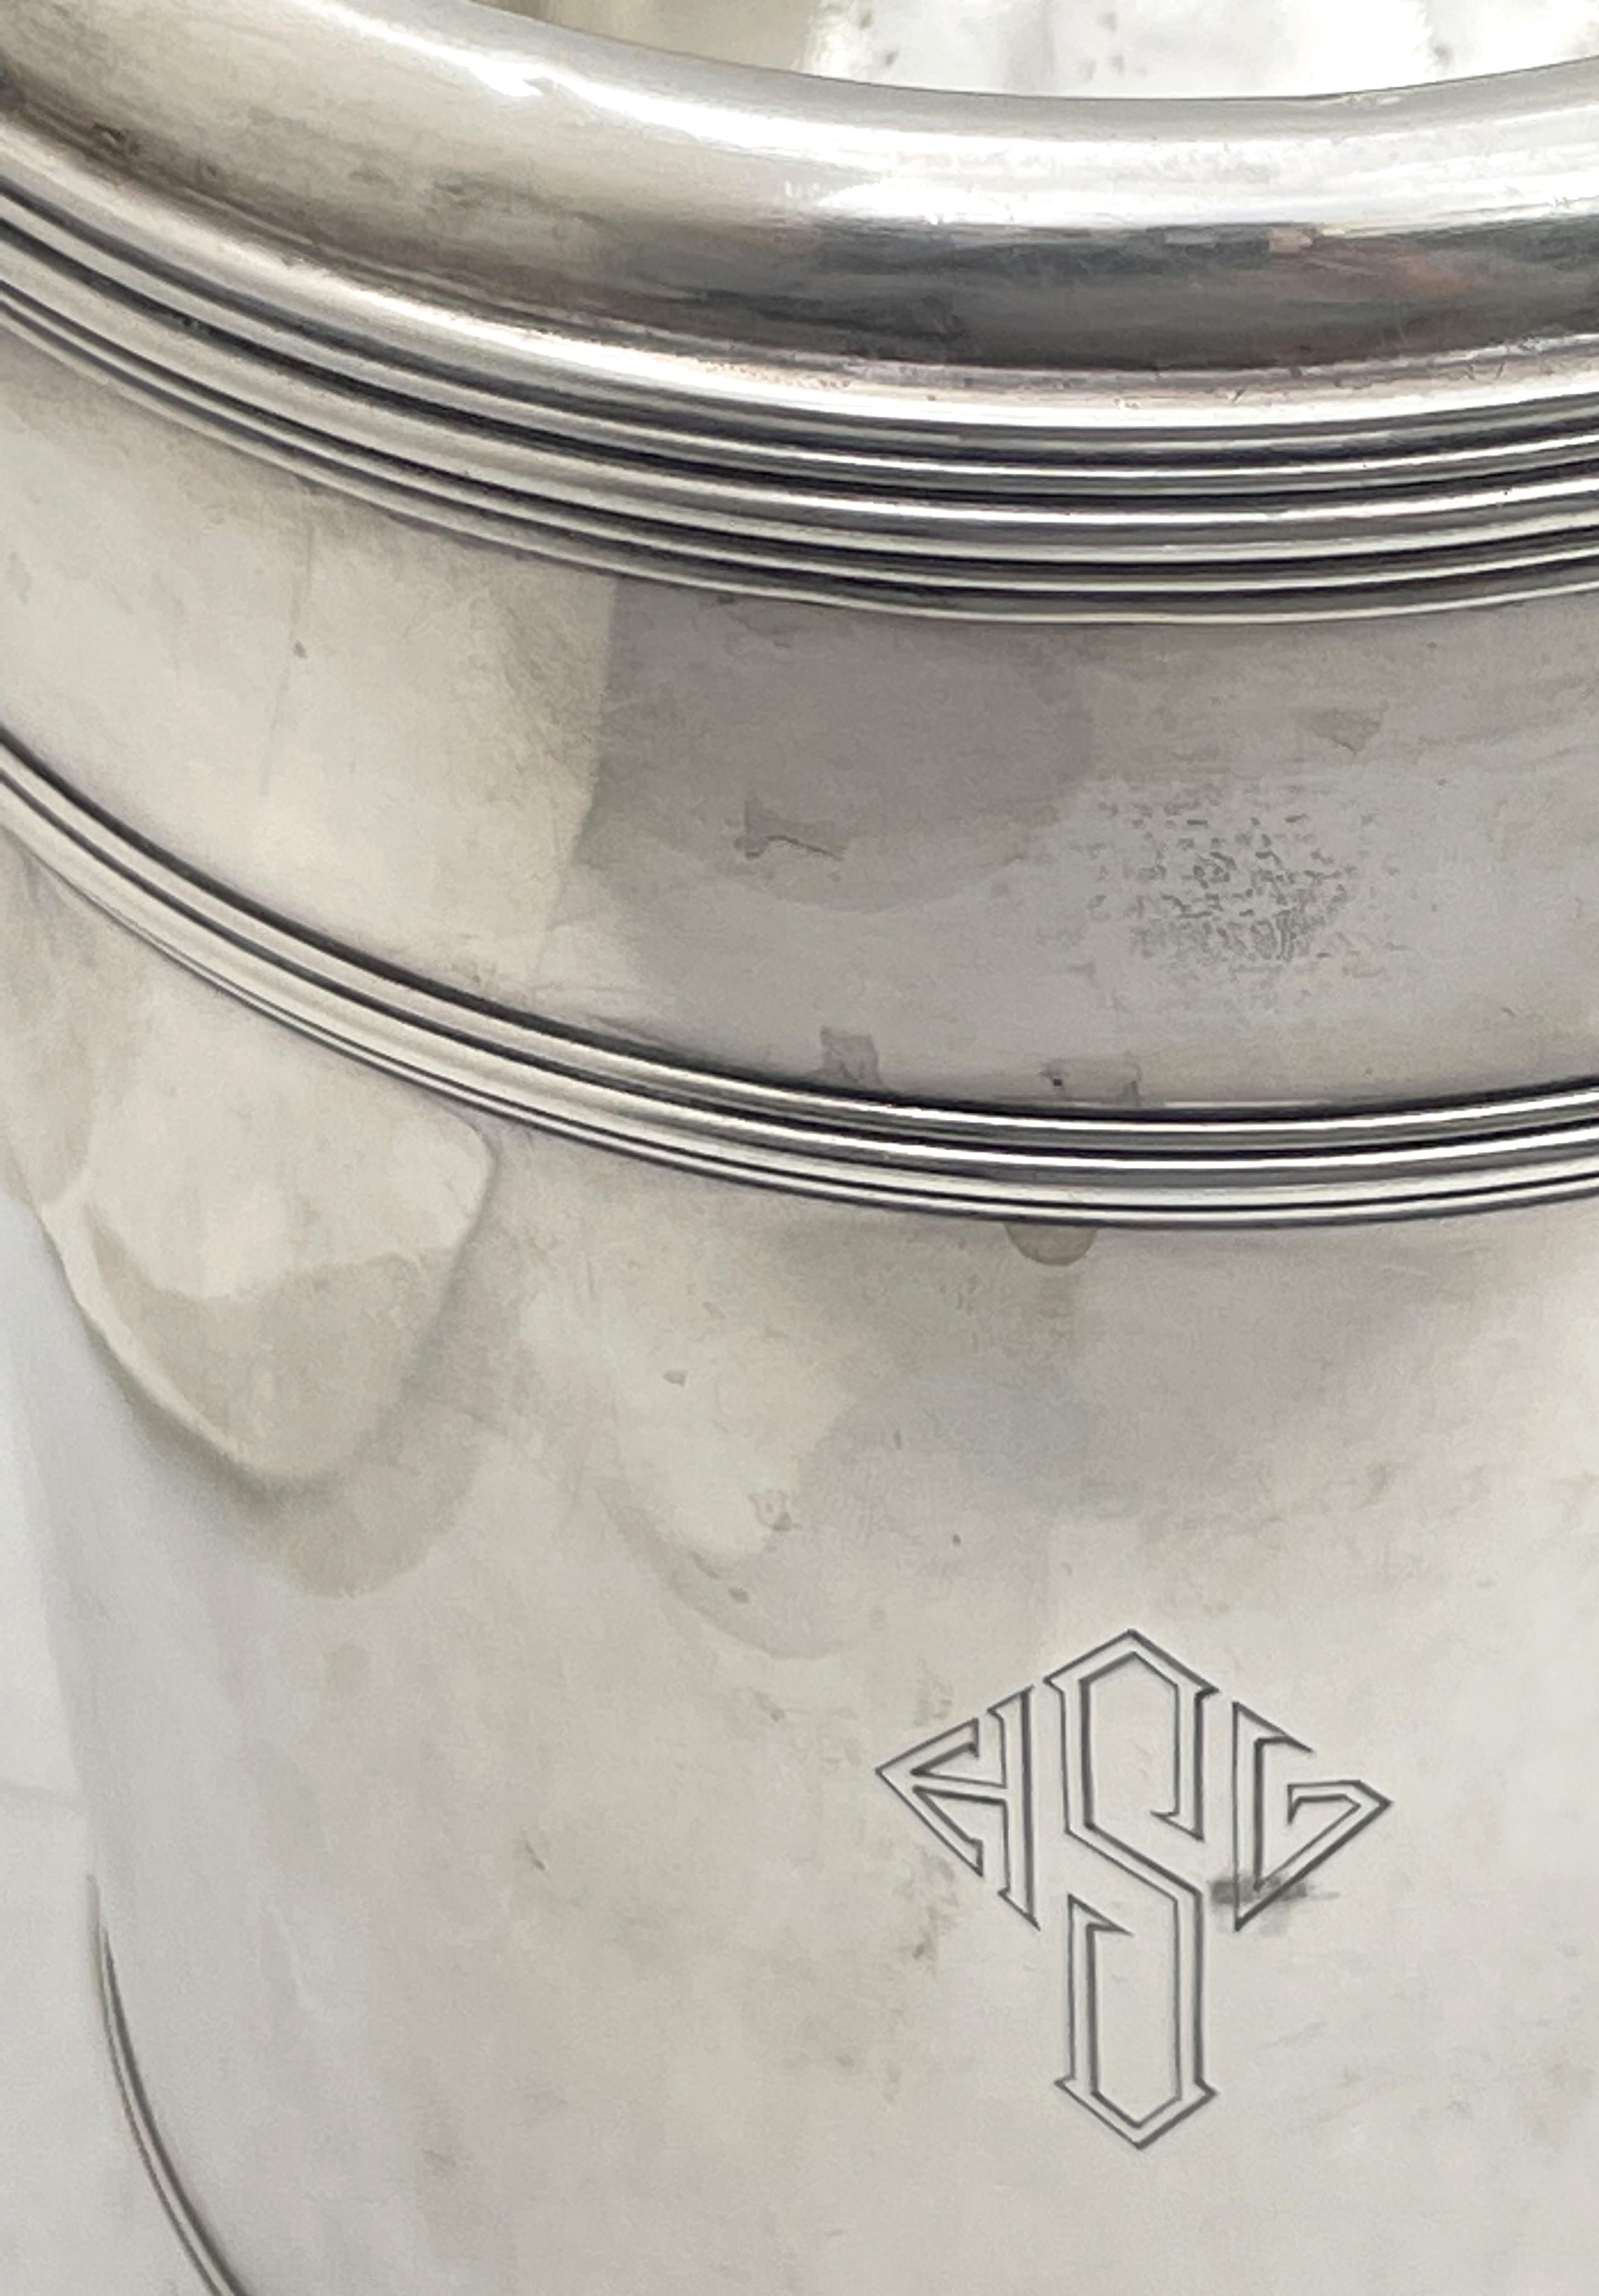 Lebkuecher (for Cartier/ Tiffany?) Sterling Silver Ice Bucket in Art Deco Style For Sale 1